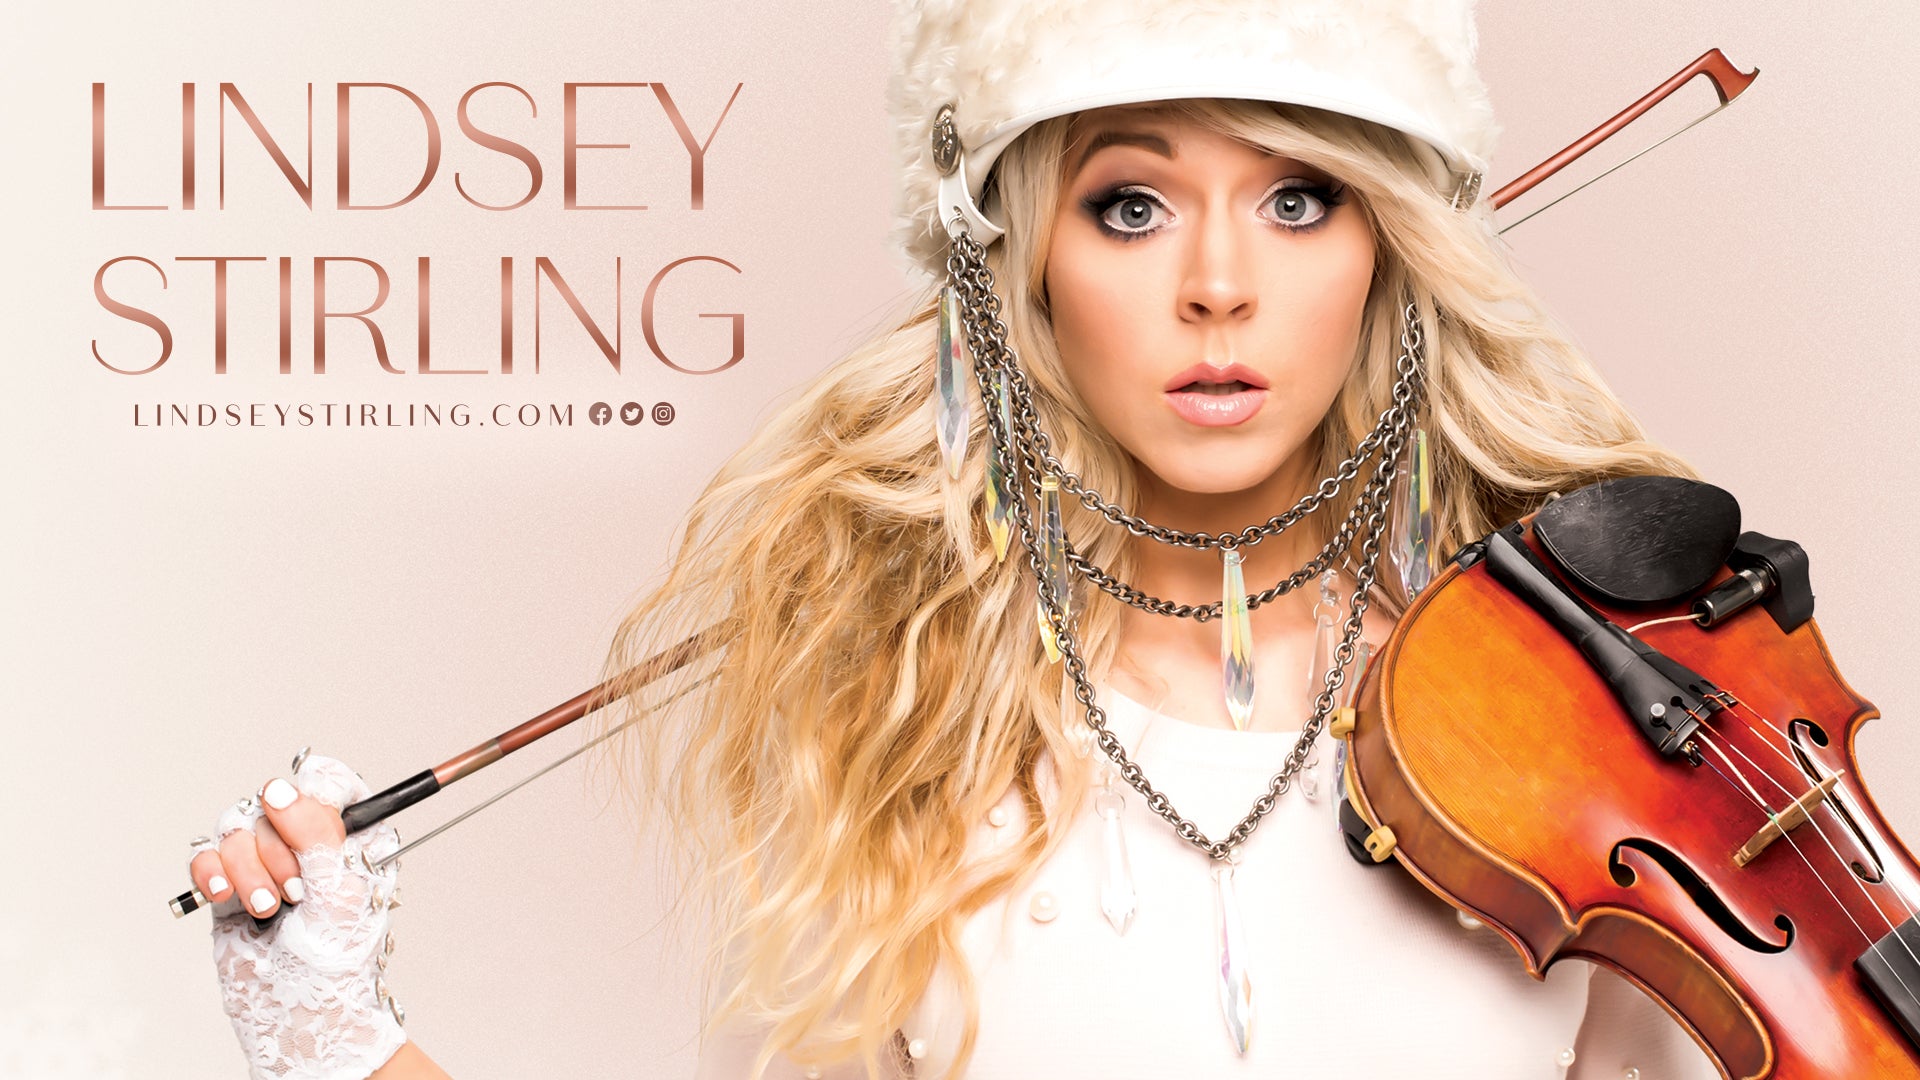 Both dance and violin Who is Lindsey Stirling?